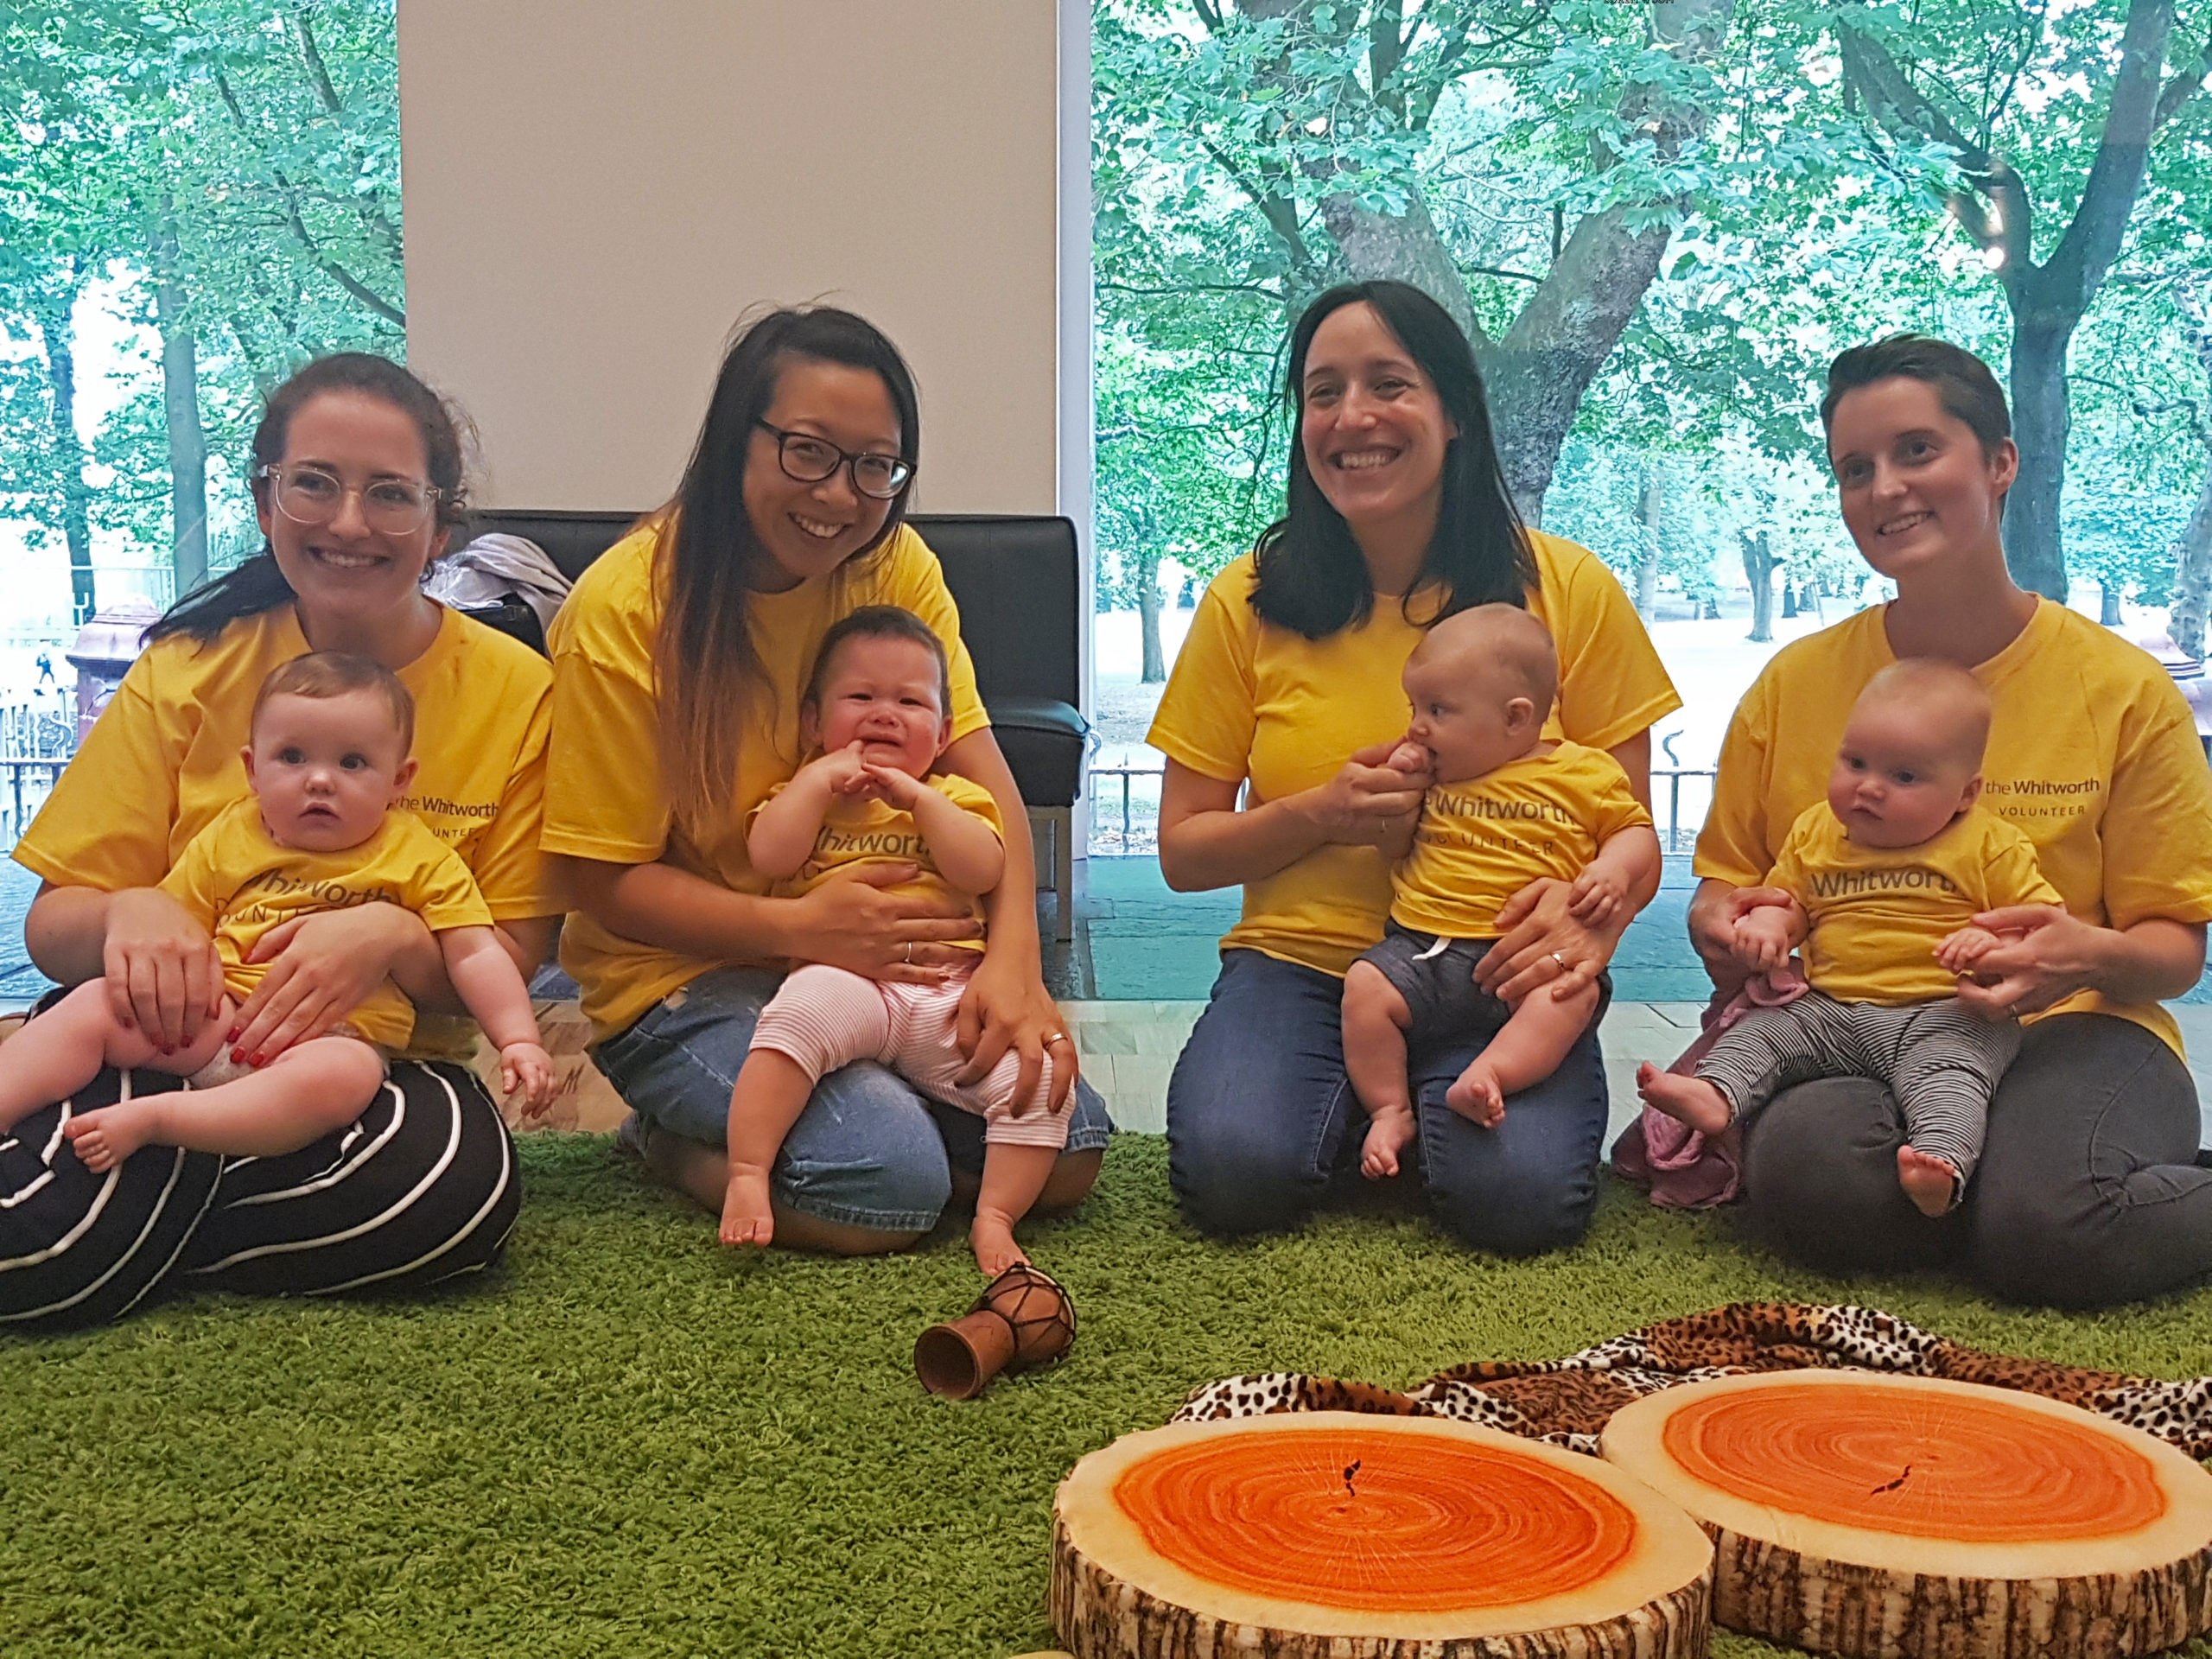 Four women kneel holding a baby each on their laps all wearing yellow volunteer t-shirts.